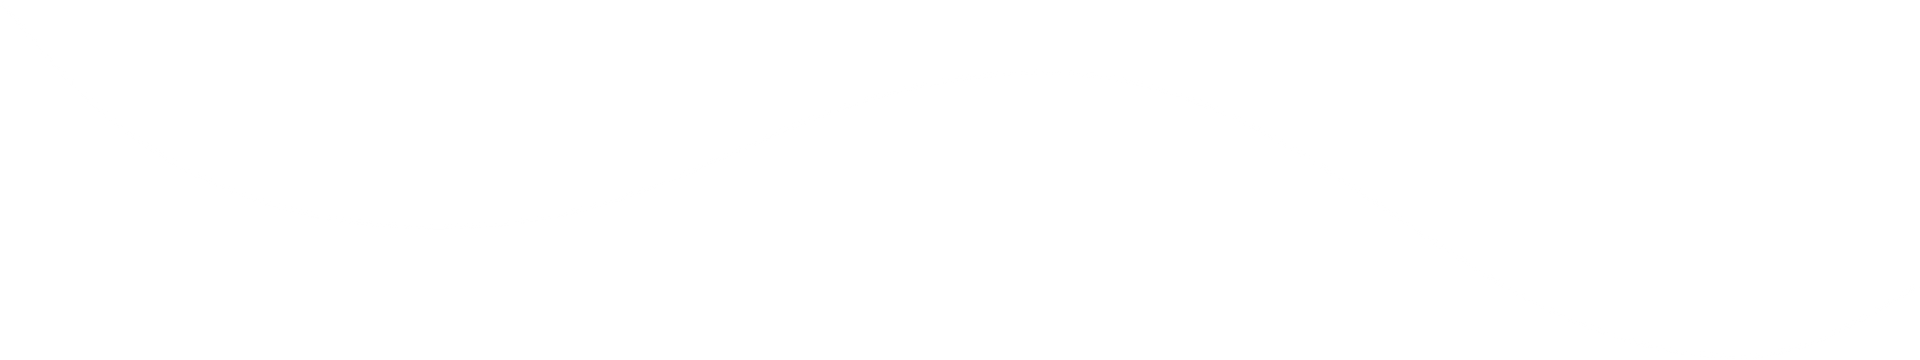 A white wave shape graphic placed over an image